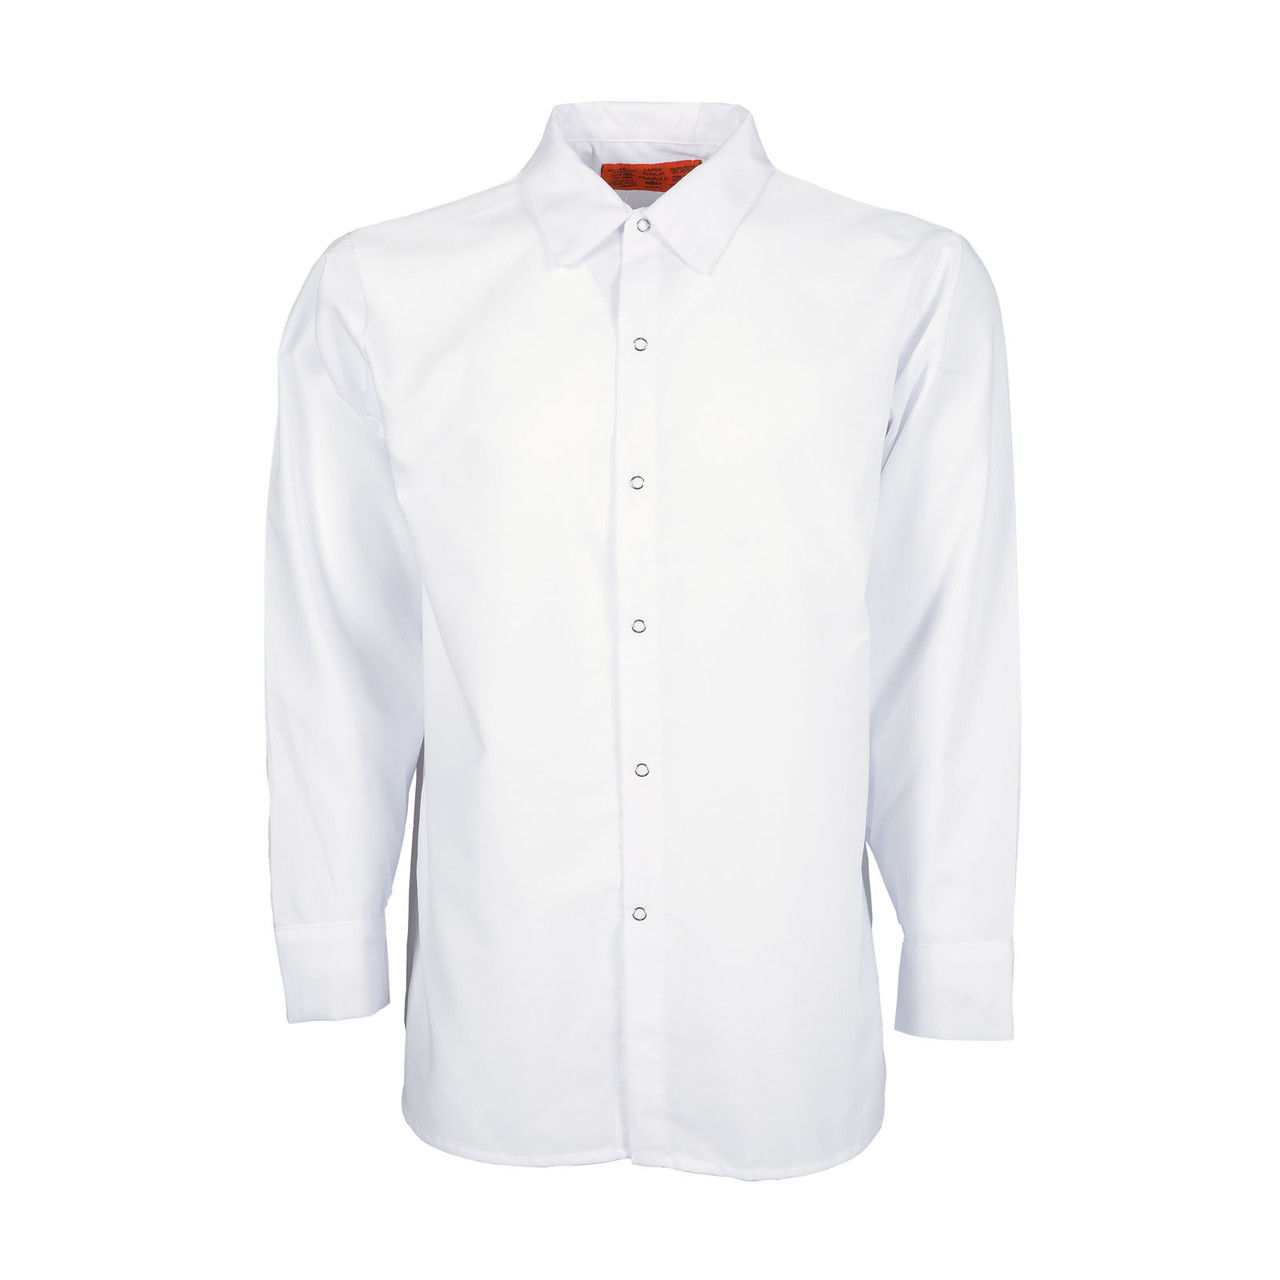 Is the white work shirts mens HACCP compliant before purchase?